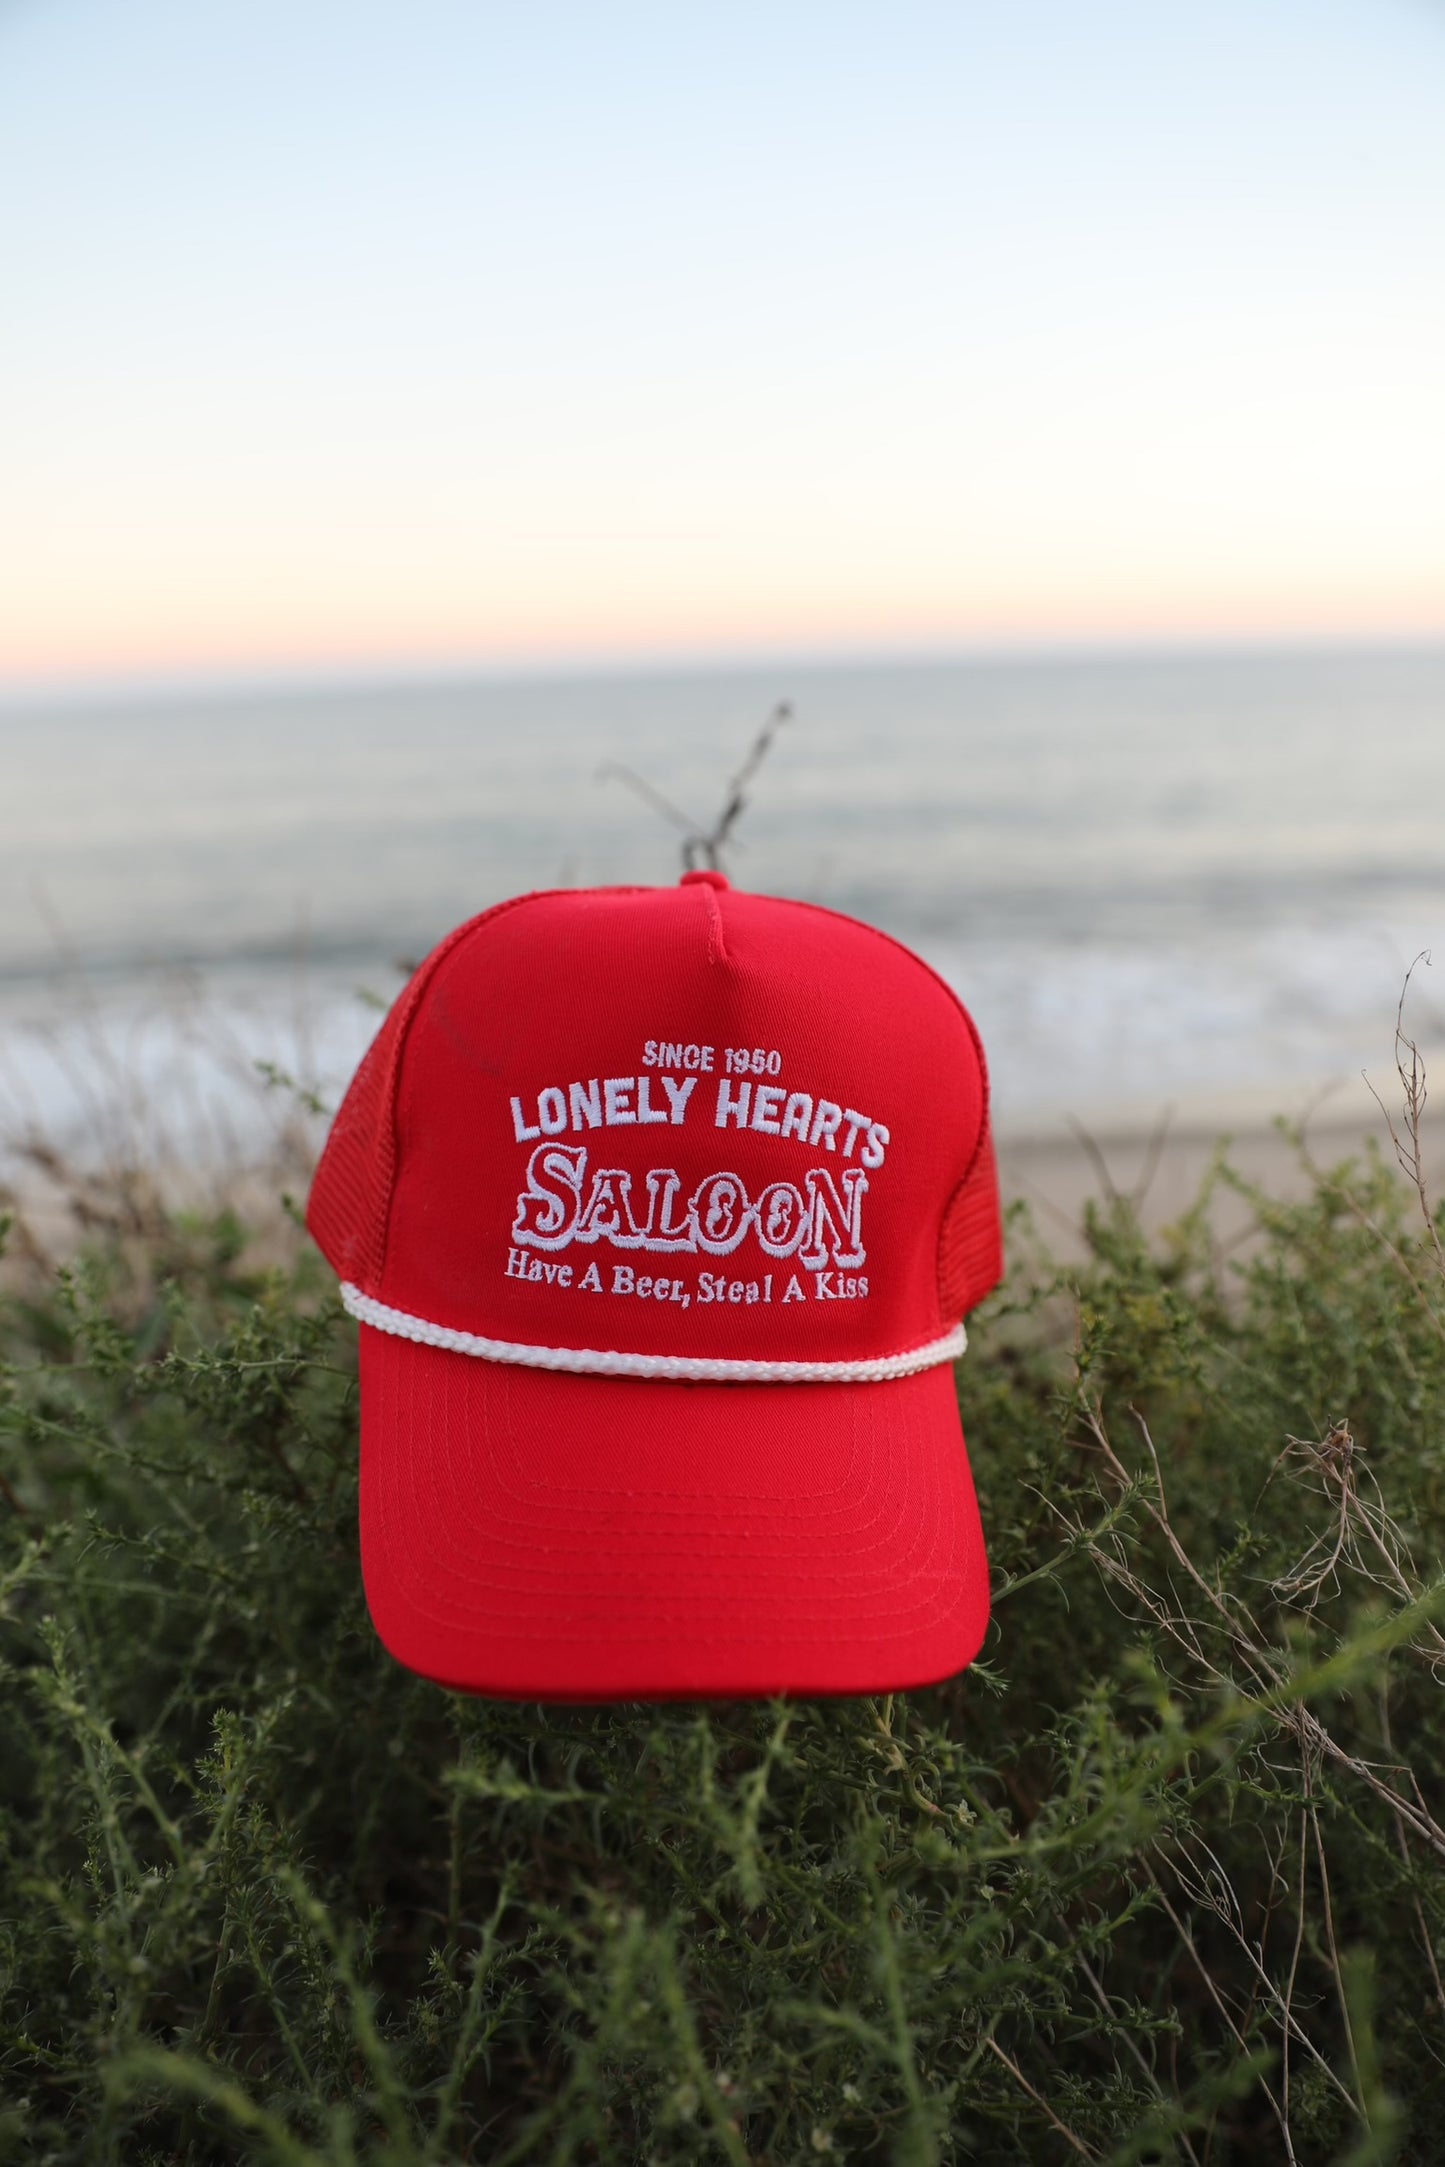 “Lonely Hearts Saloon” Vintage Rope Trucker Hat